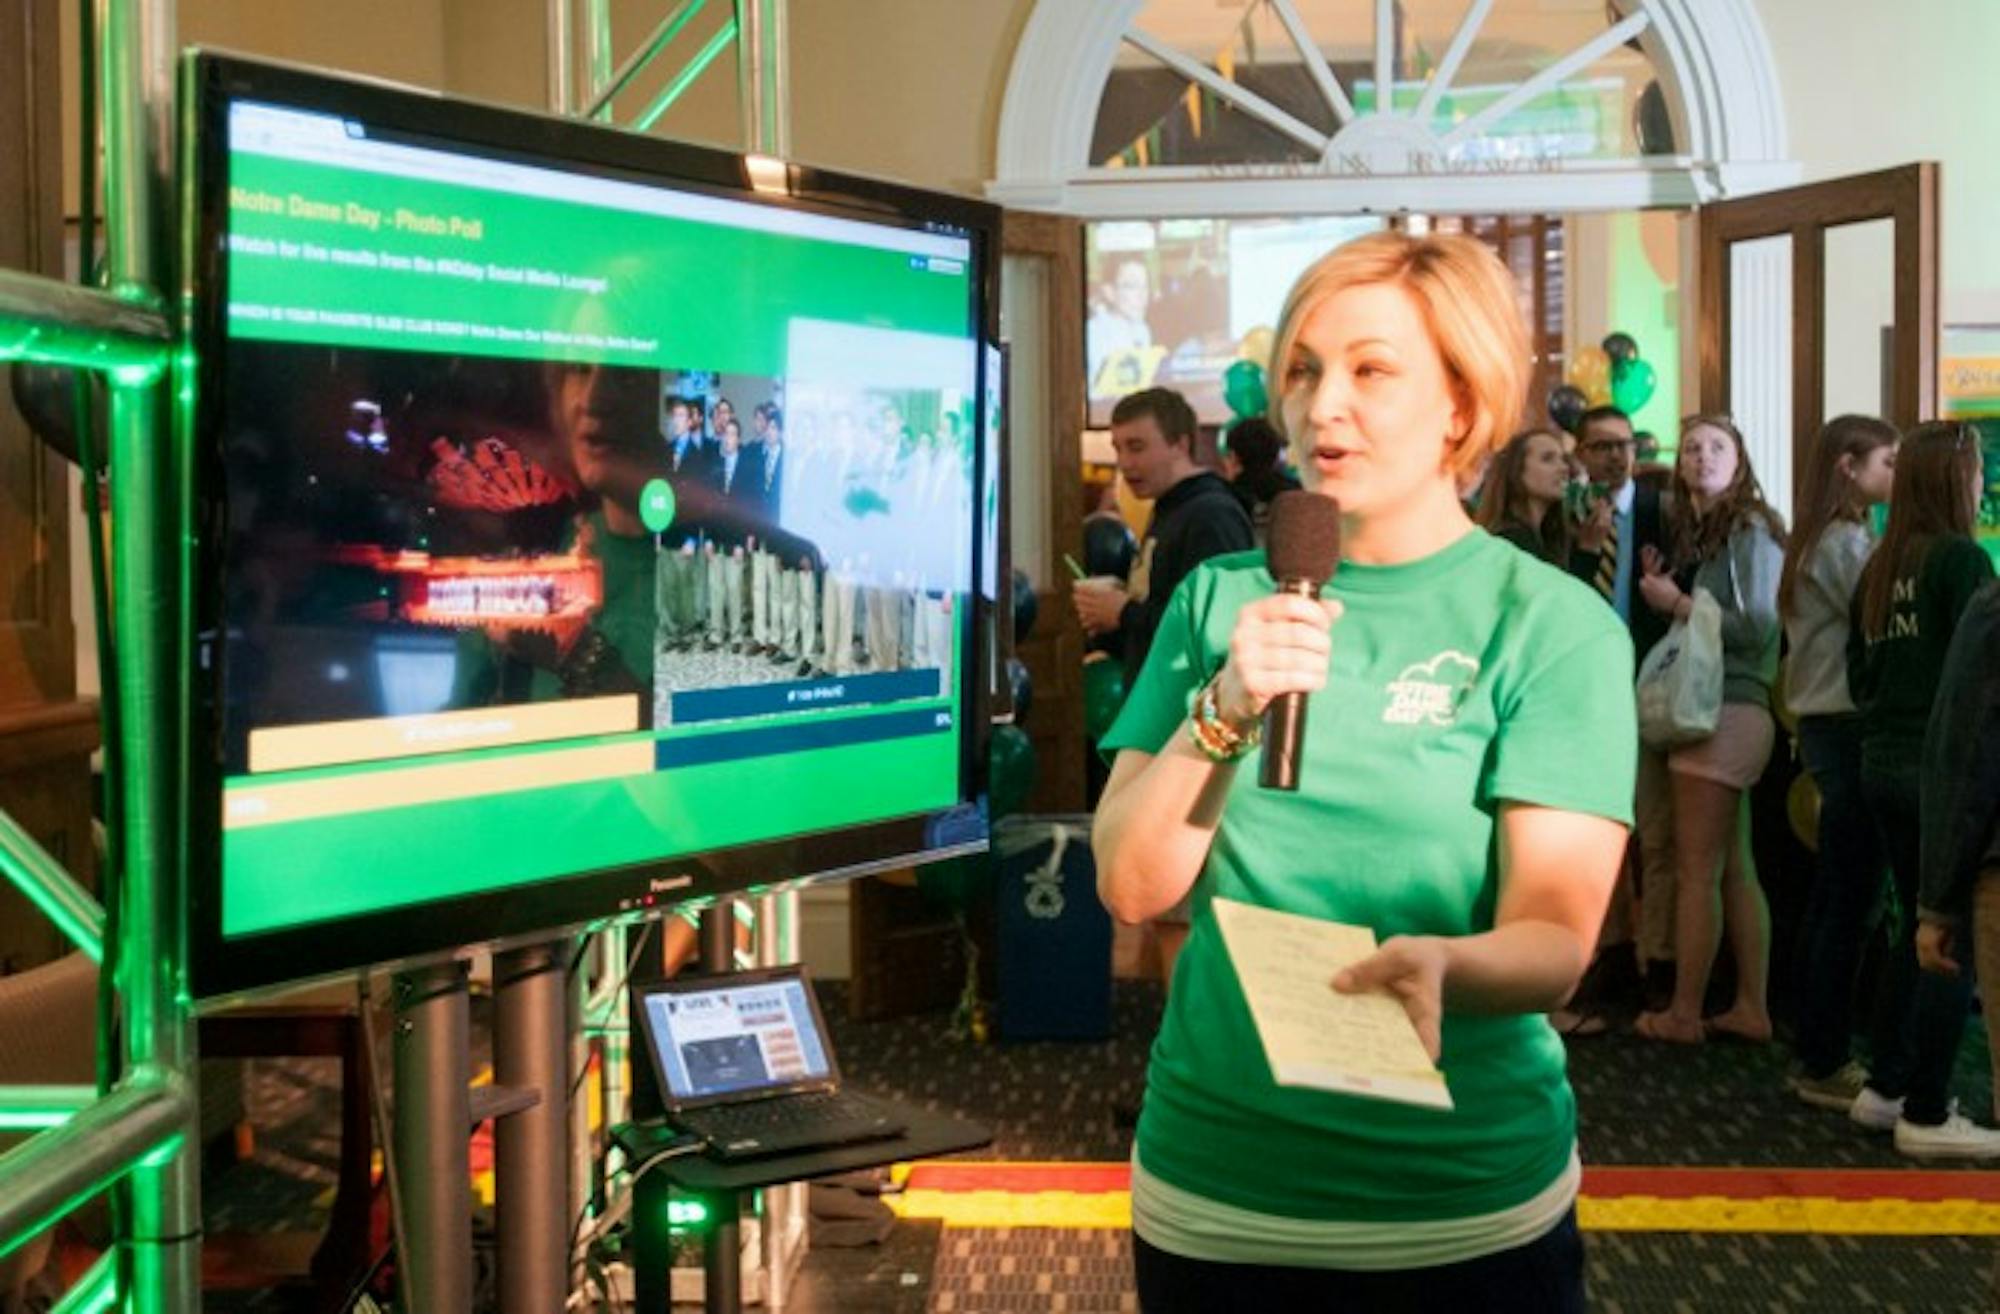 A Notre Dame Day team member speaks during the 29-hour live broadcast during the 2016 Notre Dame Day. Last year's event broke a fundraising record with 21,478 gifts contributed throughout the day.